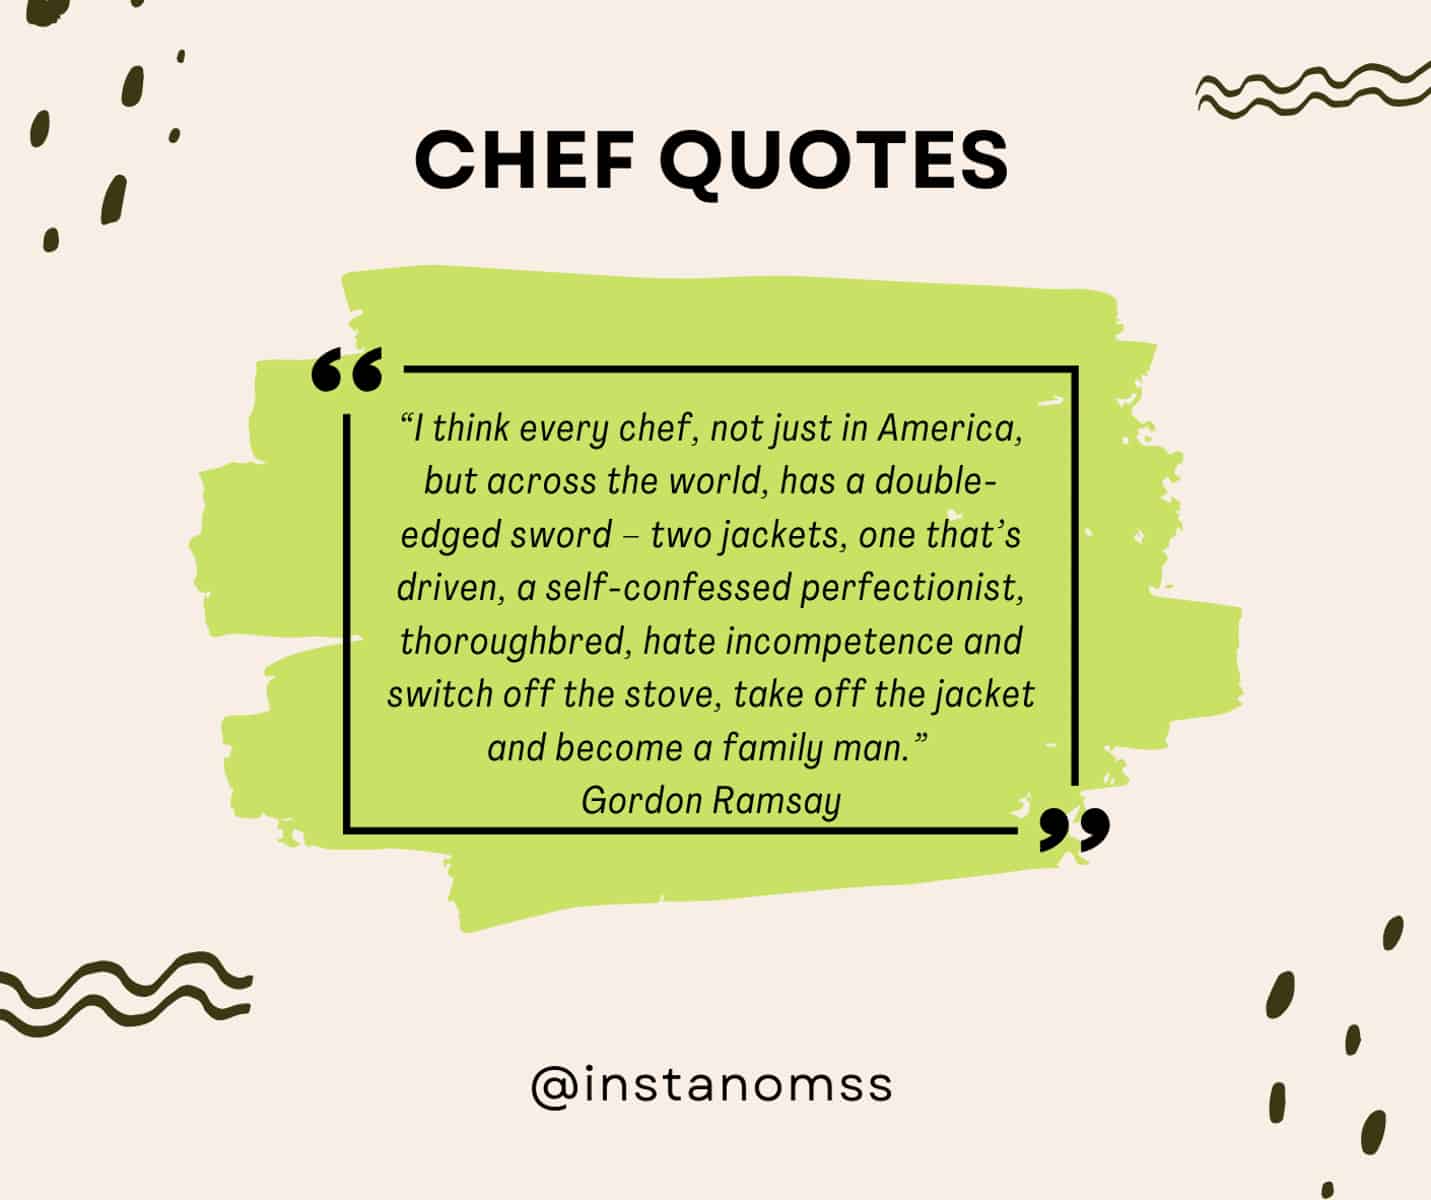 “I think every chef, not just in America, but across the world, has a double-edged sword – two jackets, one that’s driven, a self-confessed perfectionist, thoroughbred, hate incompetence and switch off the stove, take off the jacket and become a family man.” Gordon Ramsay